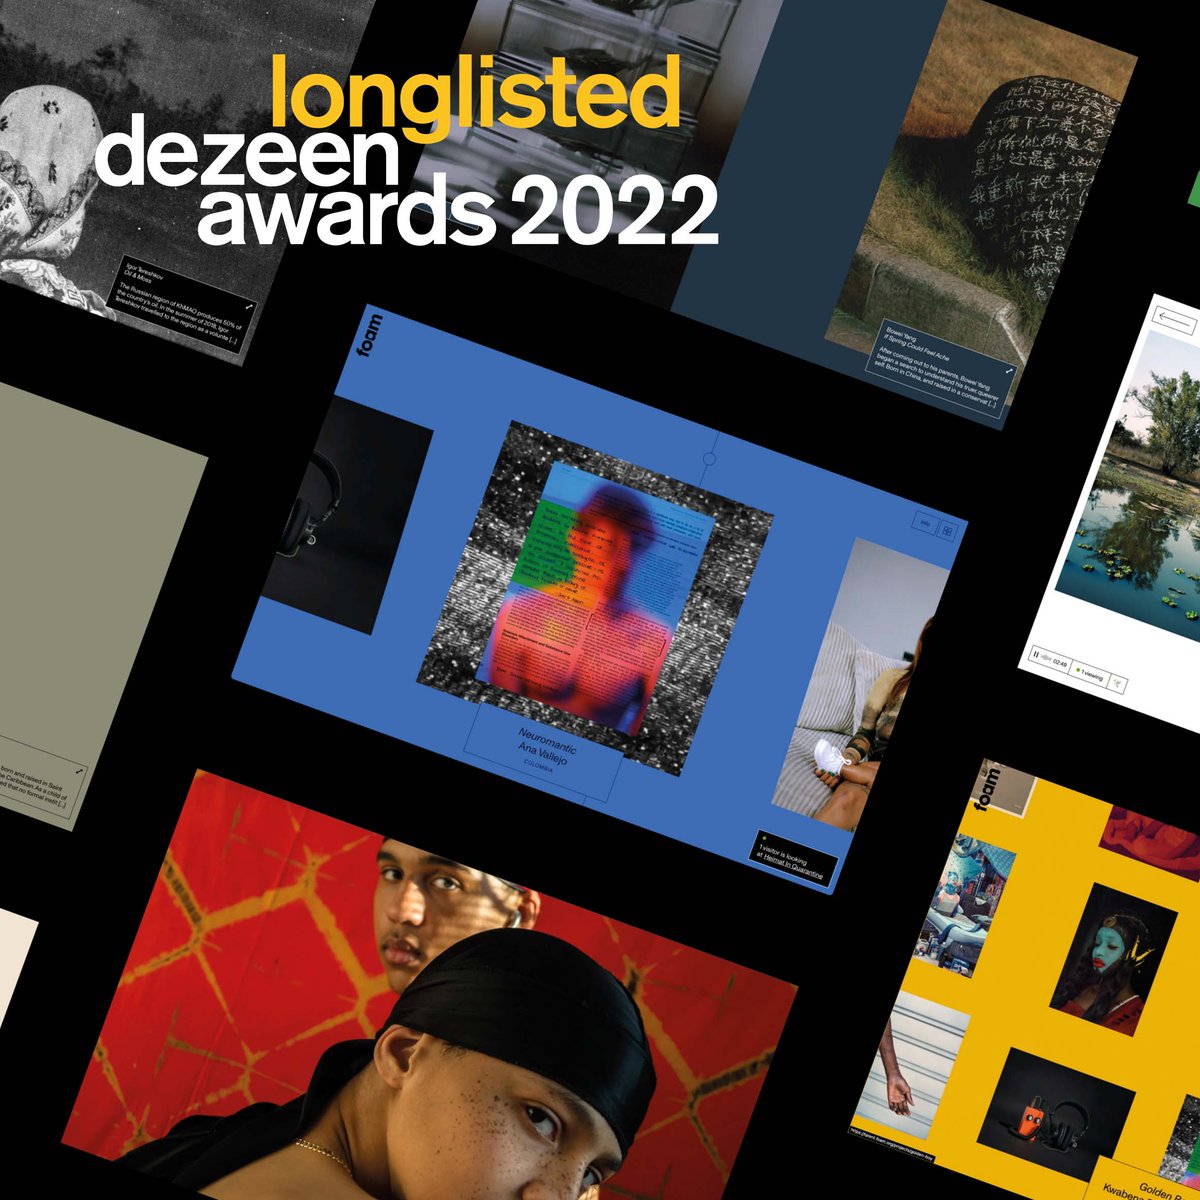 The digital exhibition we created with @foam_amsterdam & @Foam_magazine to showcase young artists has been longlisted for Website of the year by the @dezeenawards! → dezeen.com/awards/2022/lo…